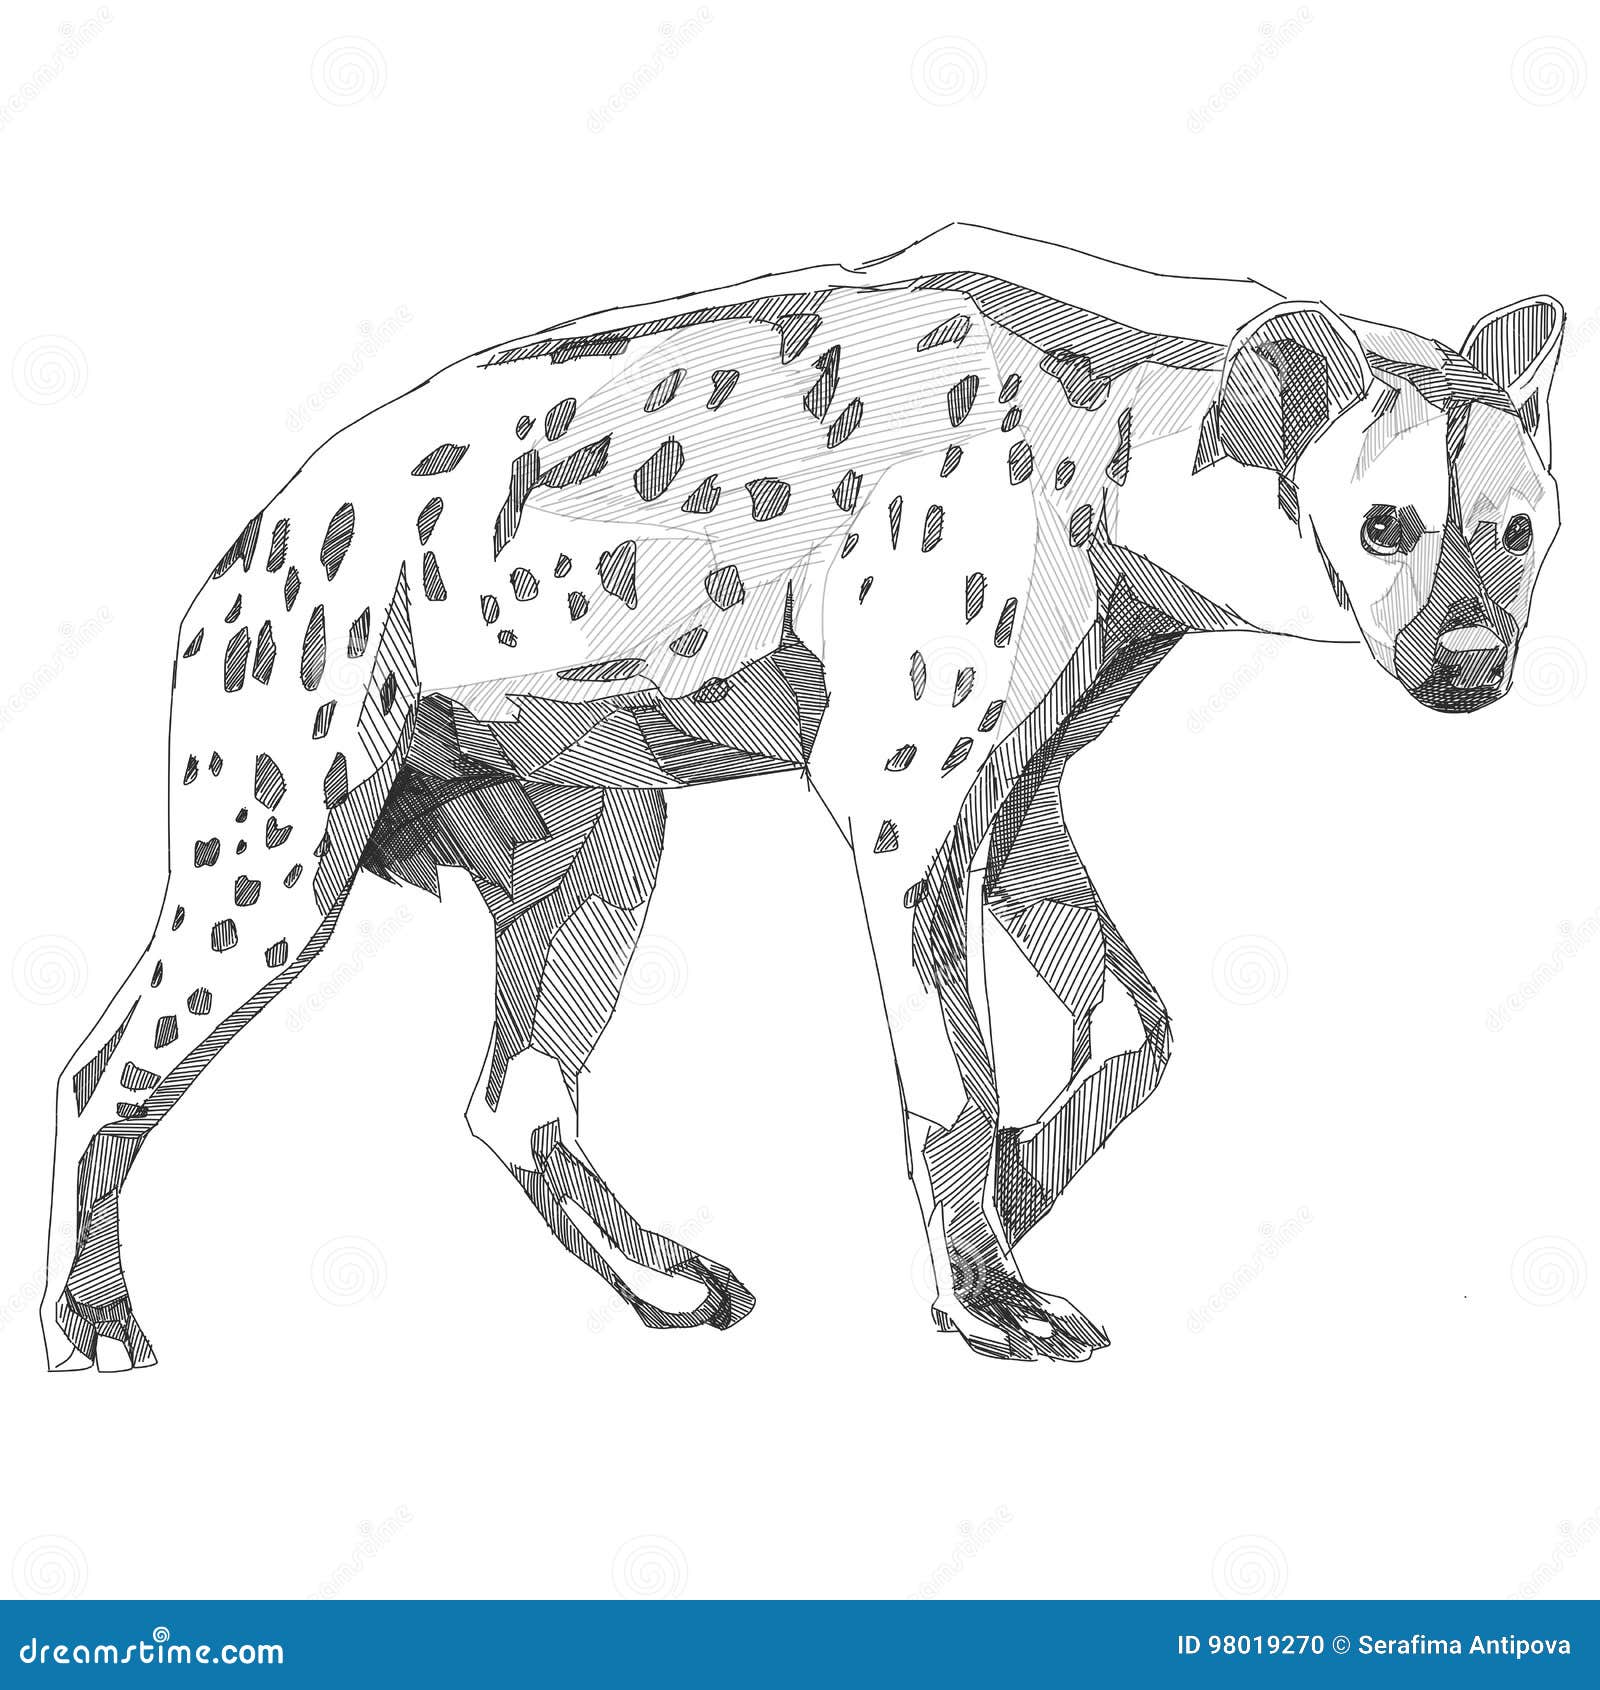 How to Draw a Hyena